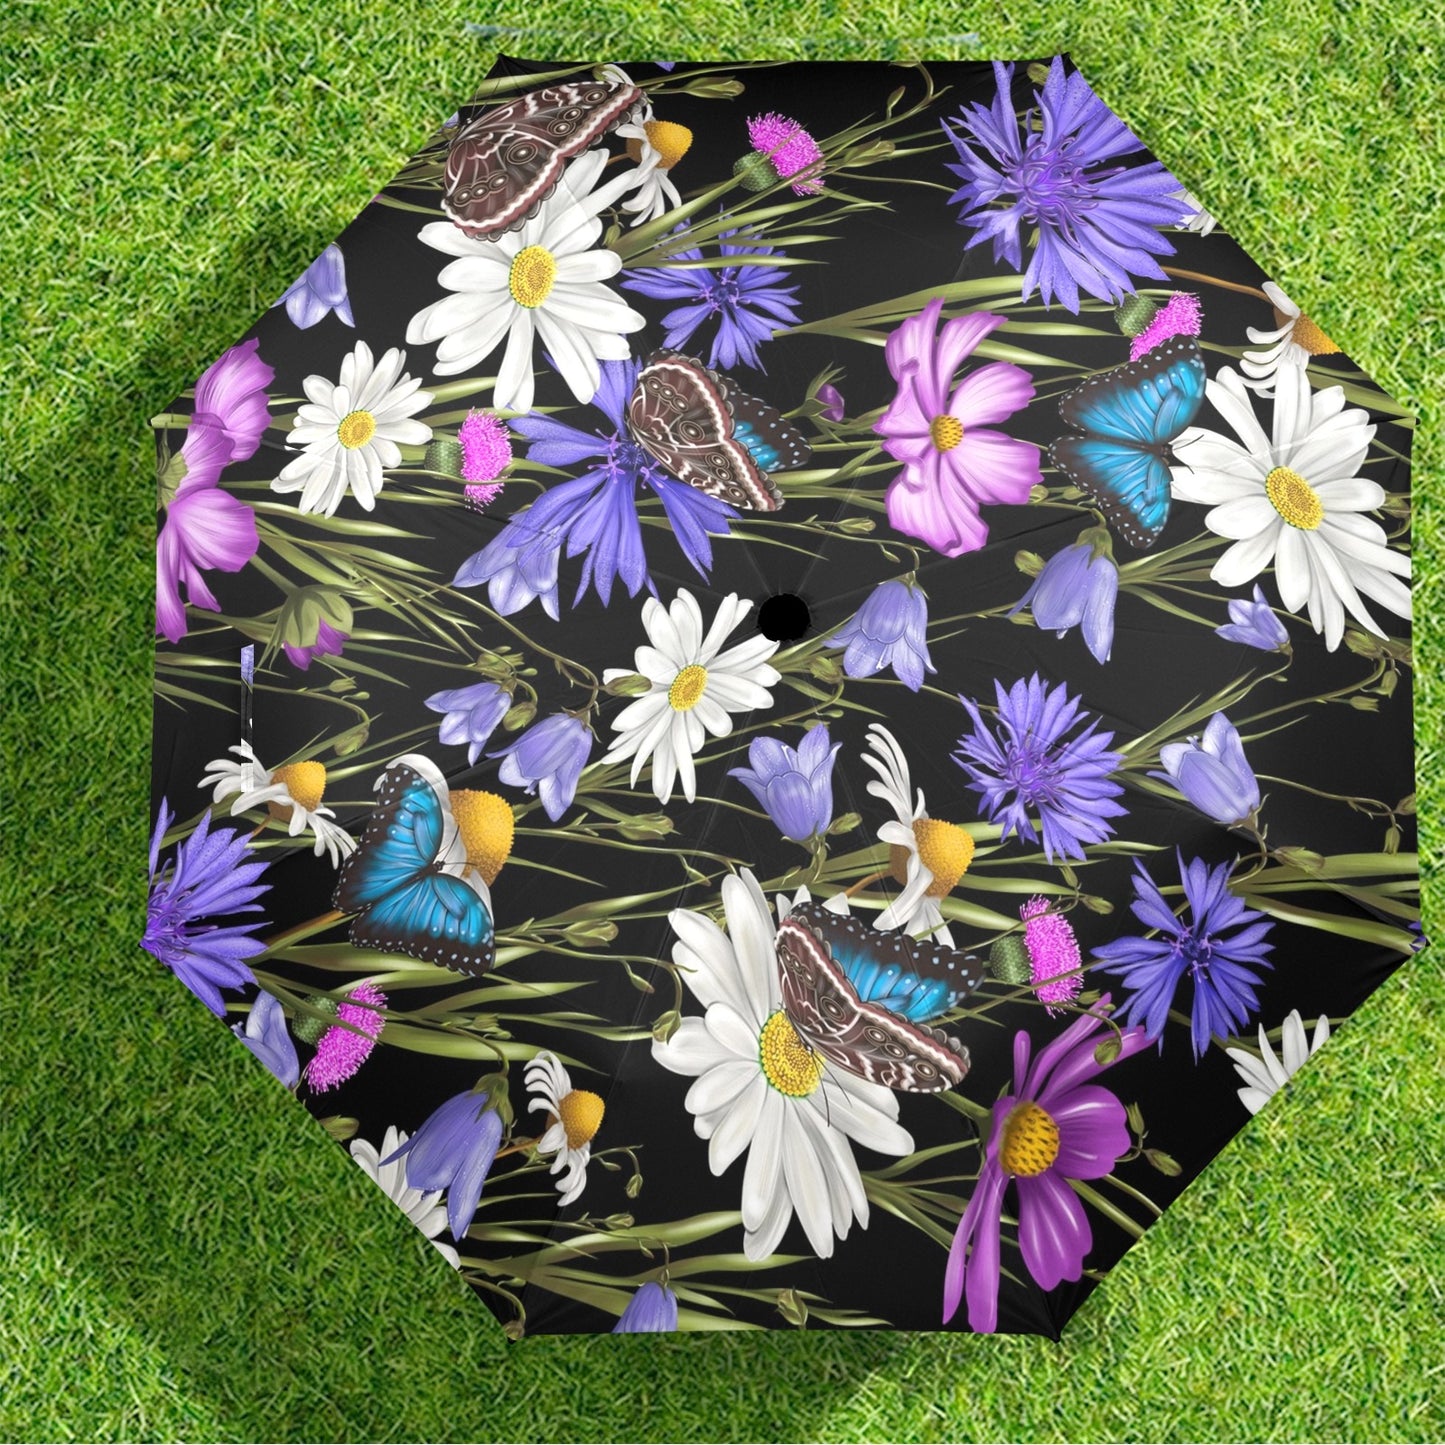 Butterfly Flowers - Semi-Automatic Foldable Umbrella Semi-Automatic Foldable Umbrella